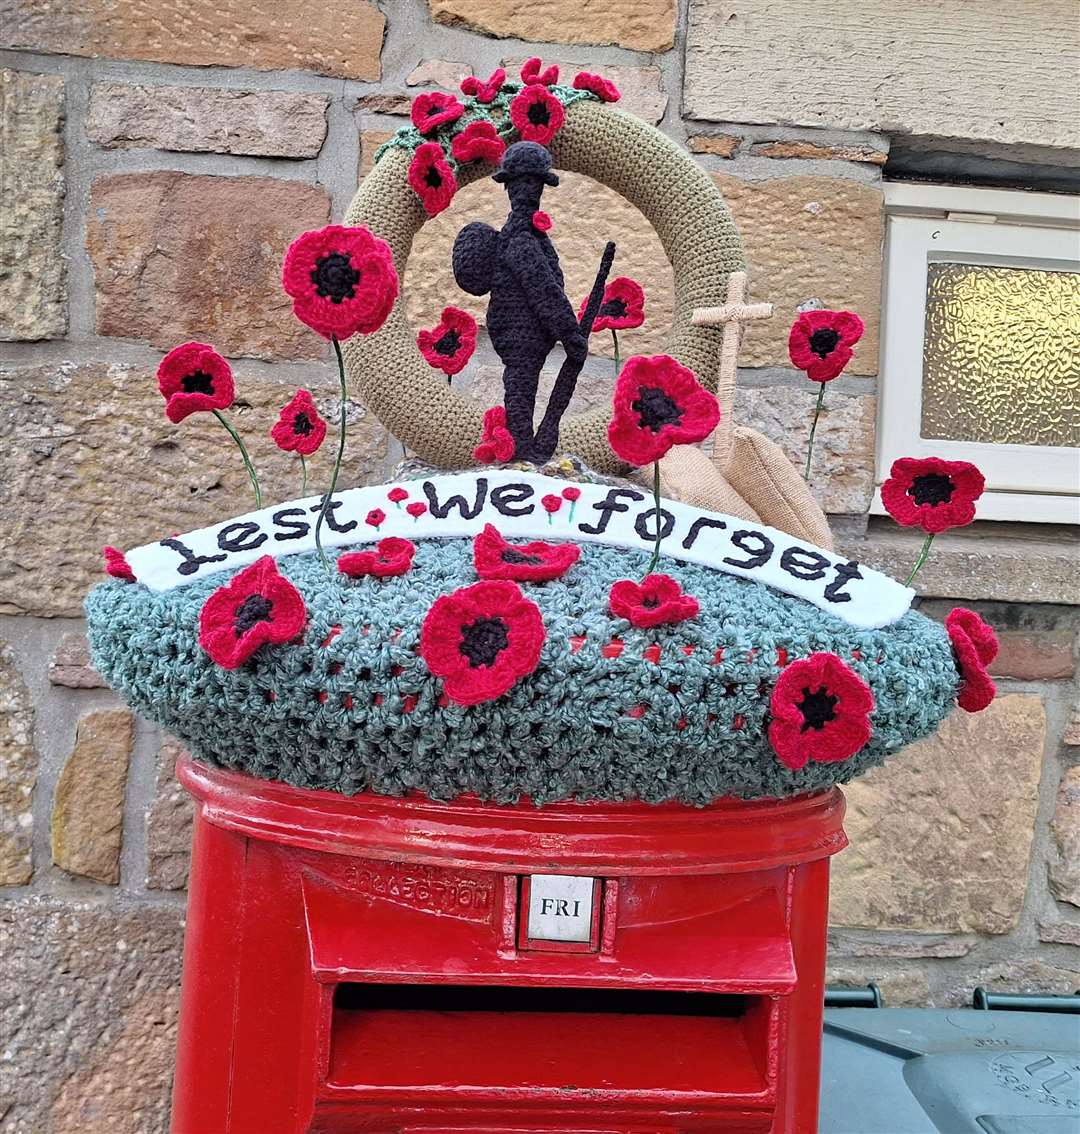 A knitted tribute to the Fallen on a postbox in Dornoch.